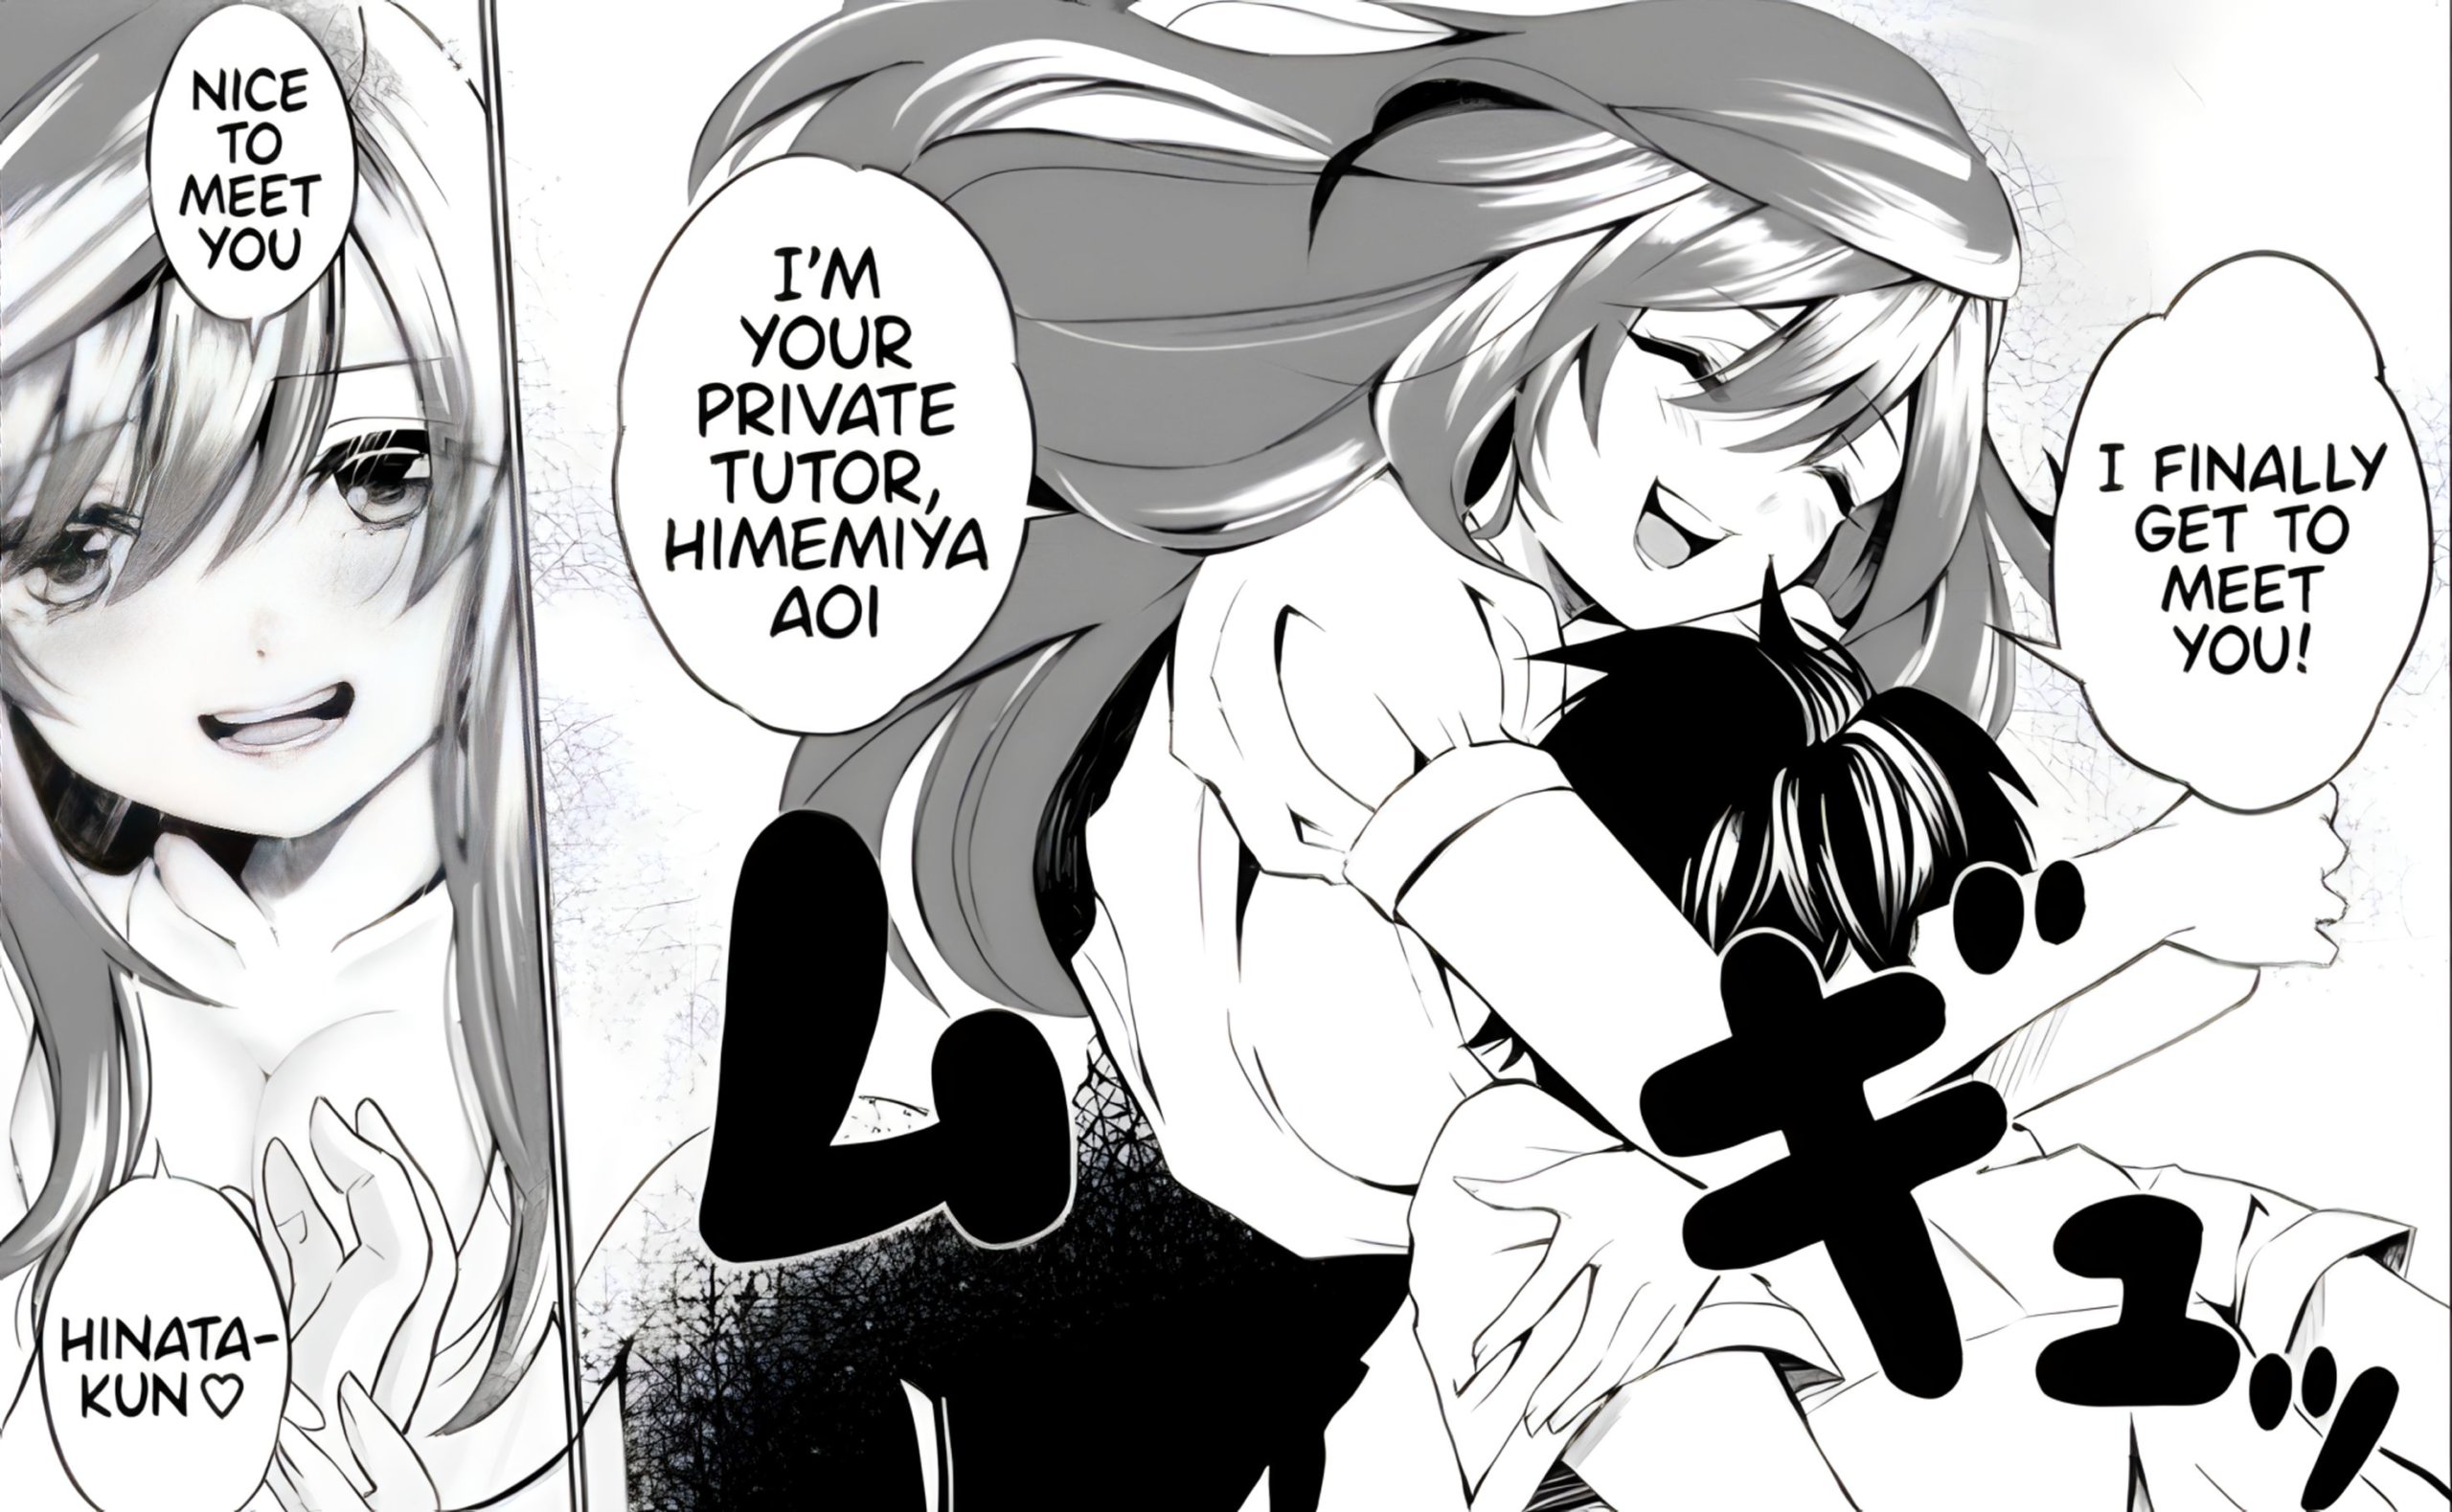 My Private Tutor is too XXX for Me to Study - Manga Ecchi 